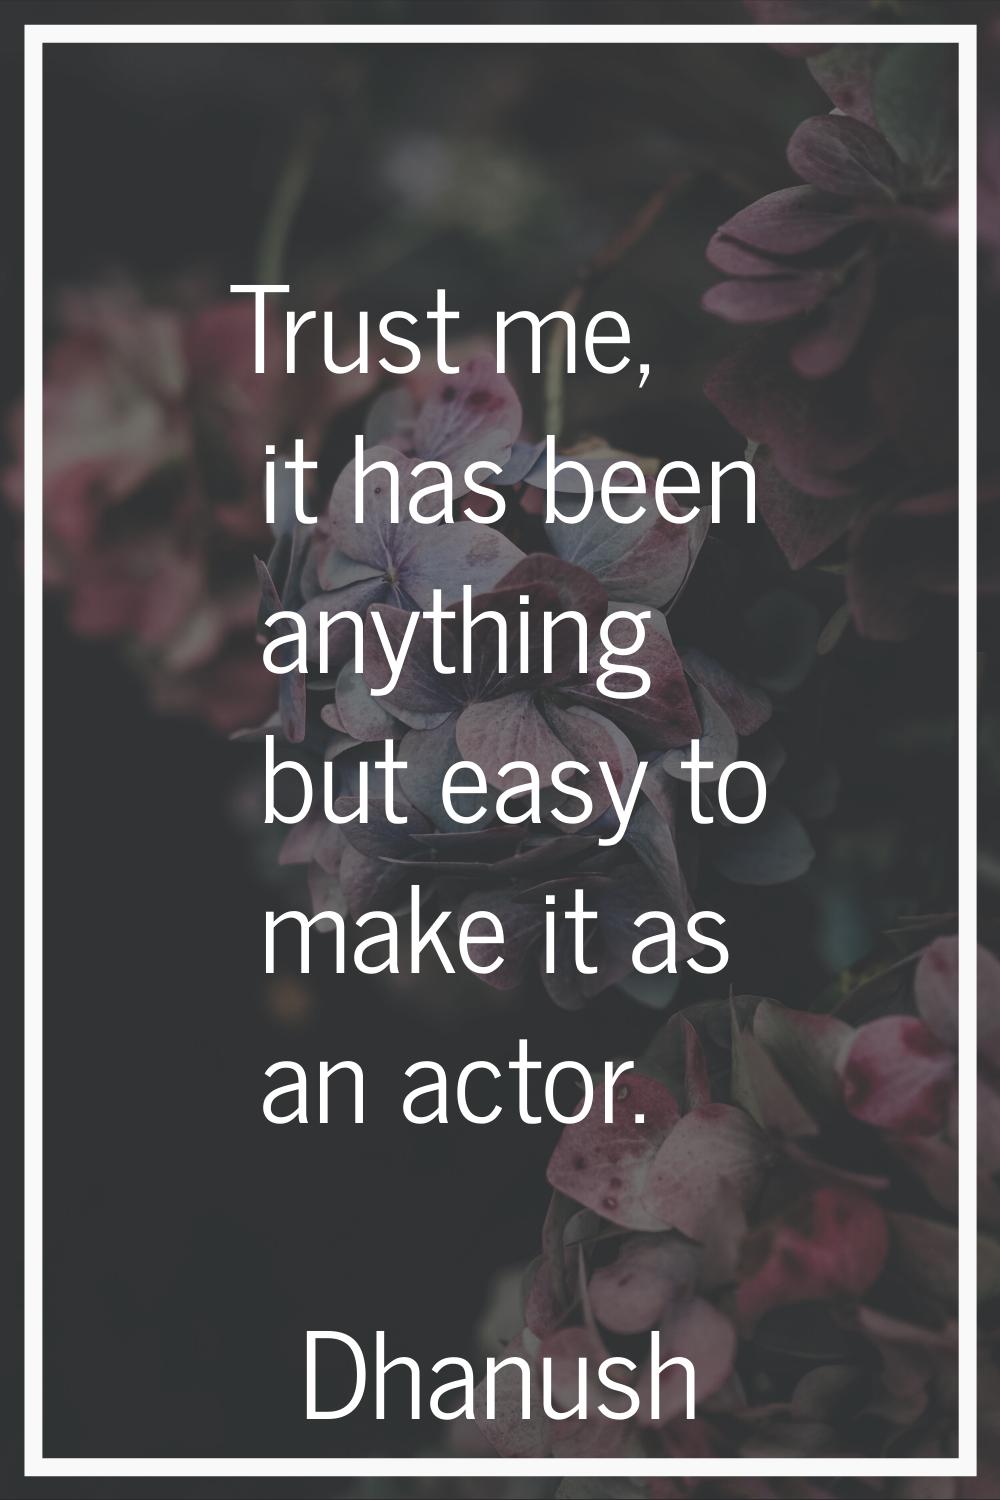 Trust me, it has been anything but easy to make it as an actor.